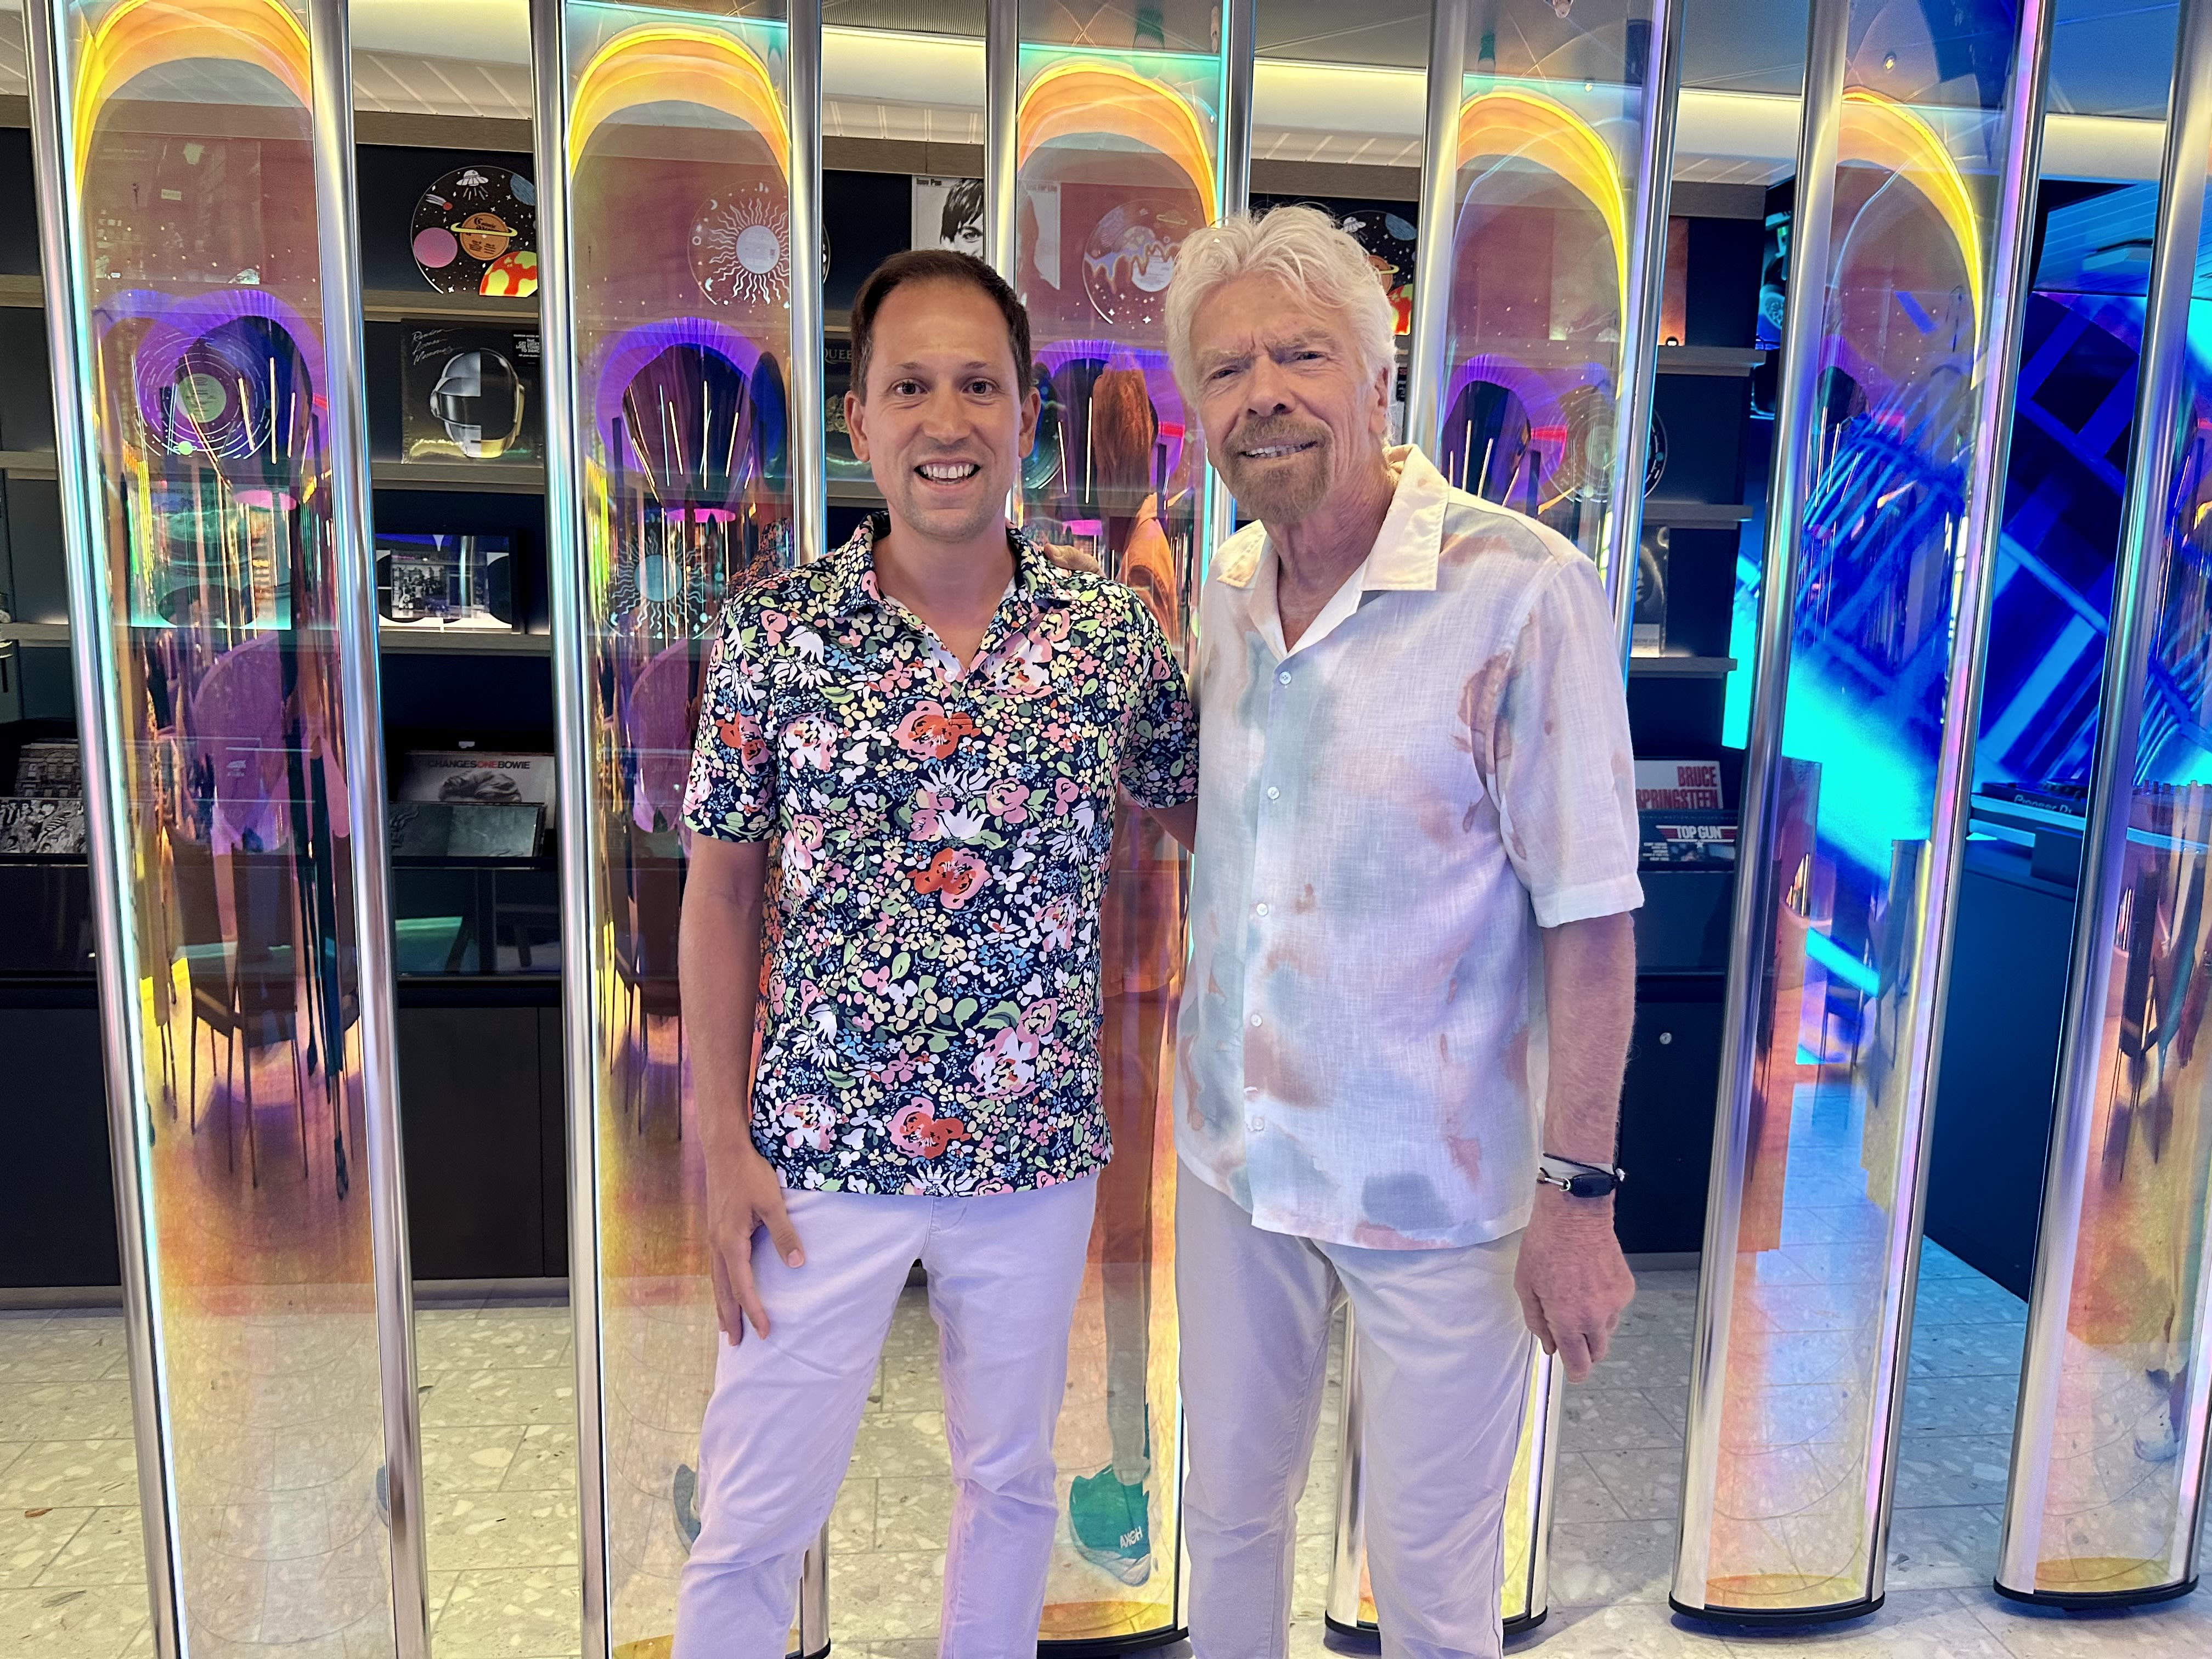 Richard Branson onboard Virgin Voyages with a loyal sailor, Chris